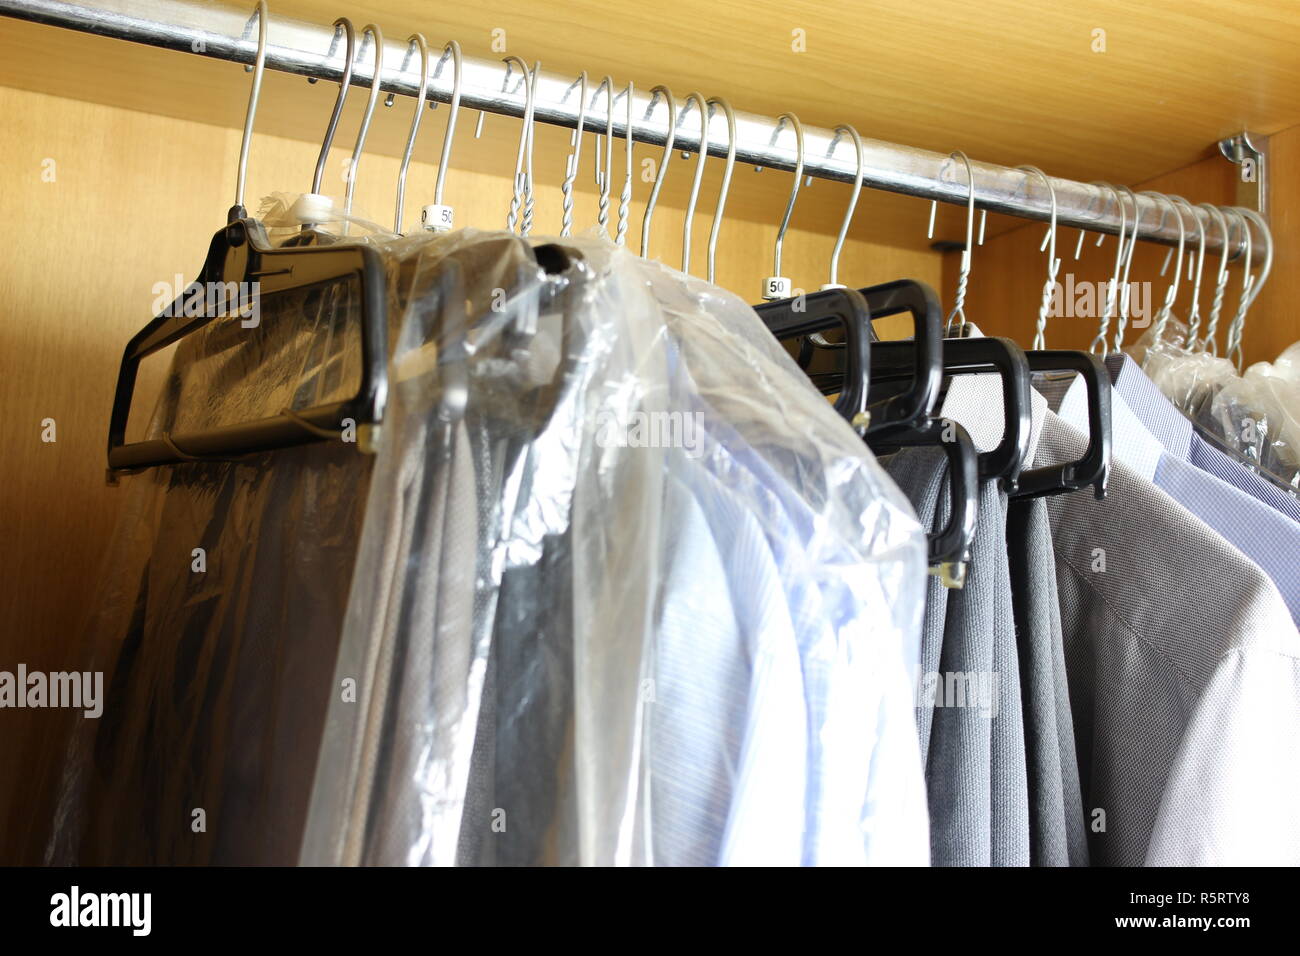 Dirty wardrobe with various men's clothes Stock Photo